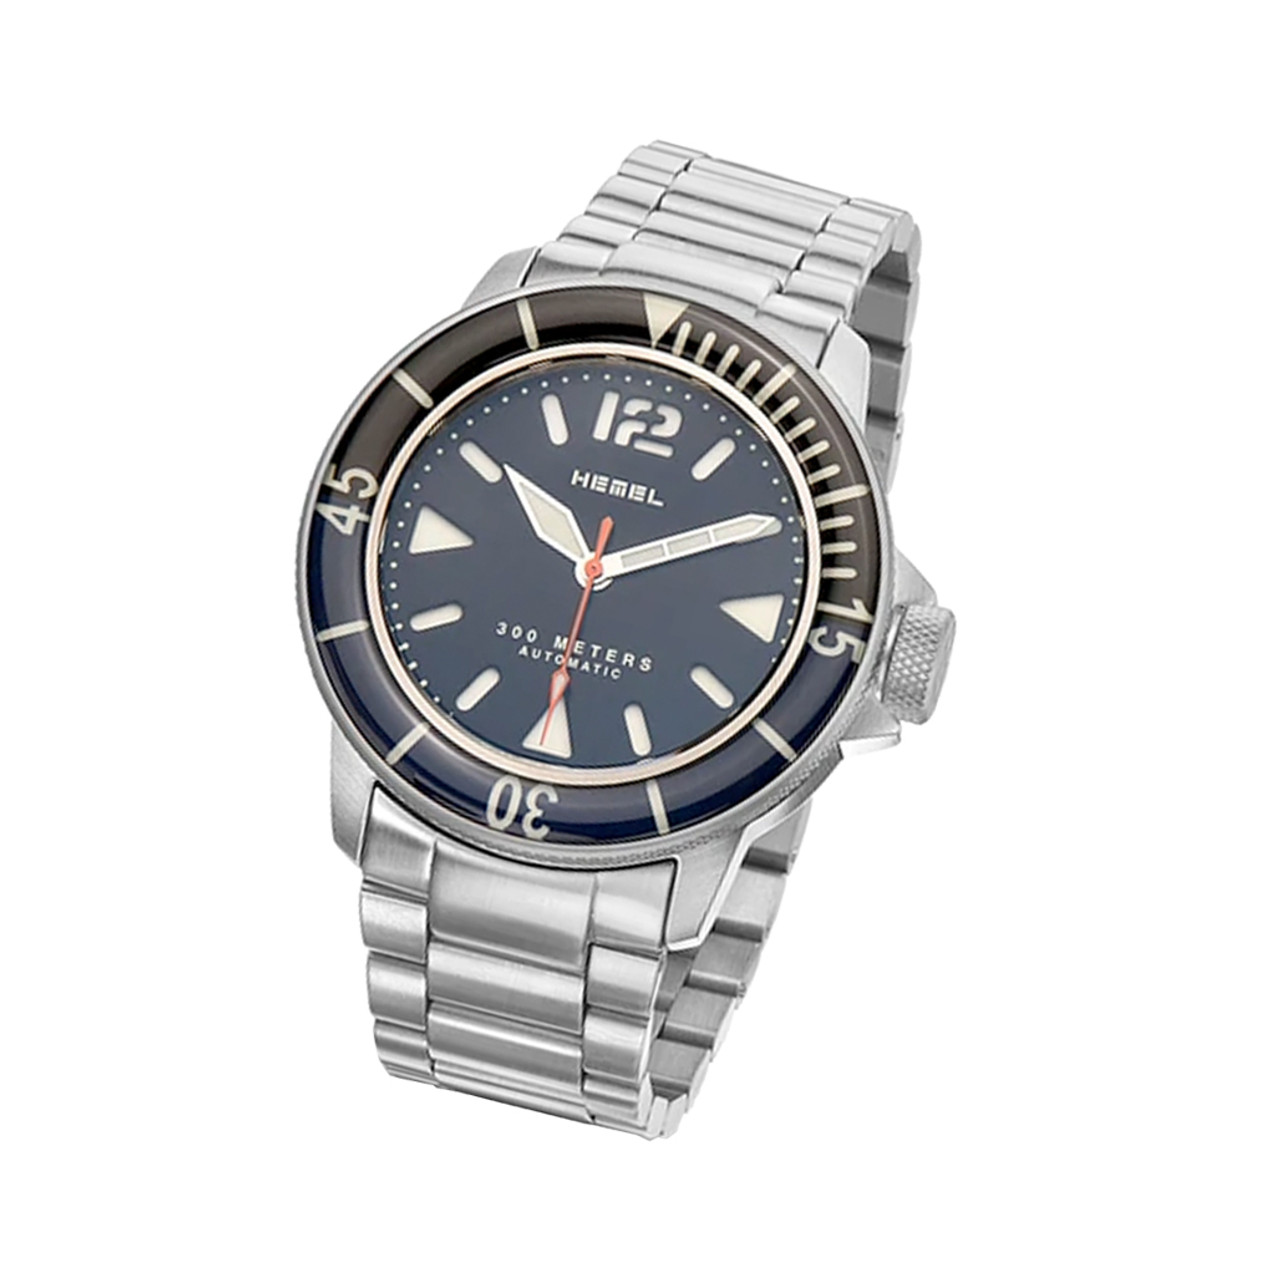 HEMEL 300-meter Automatic Dive Watch with AR sapphire crystal #HD1BB